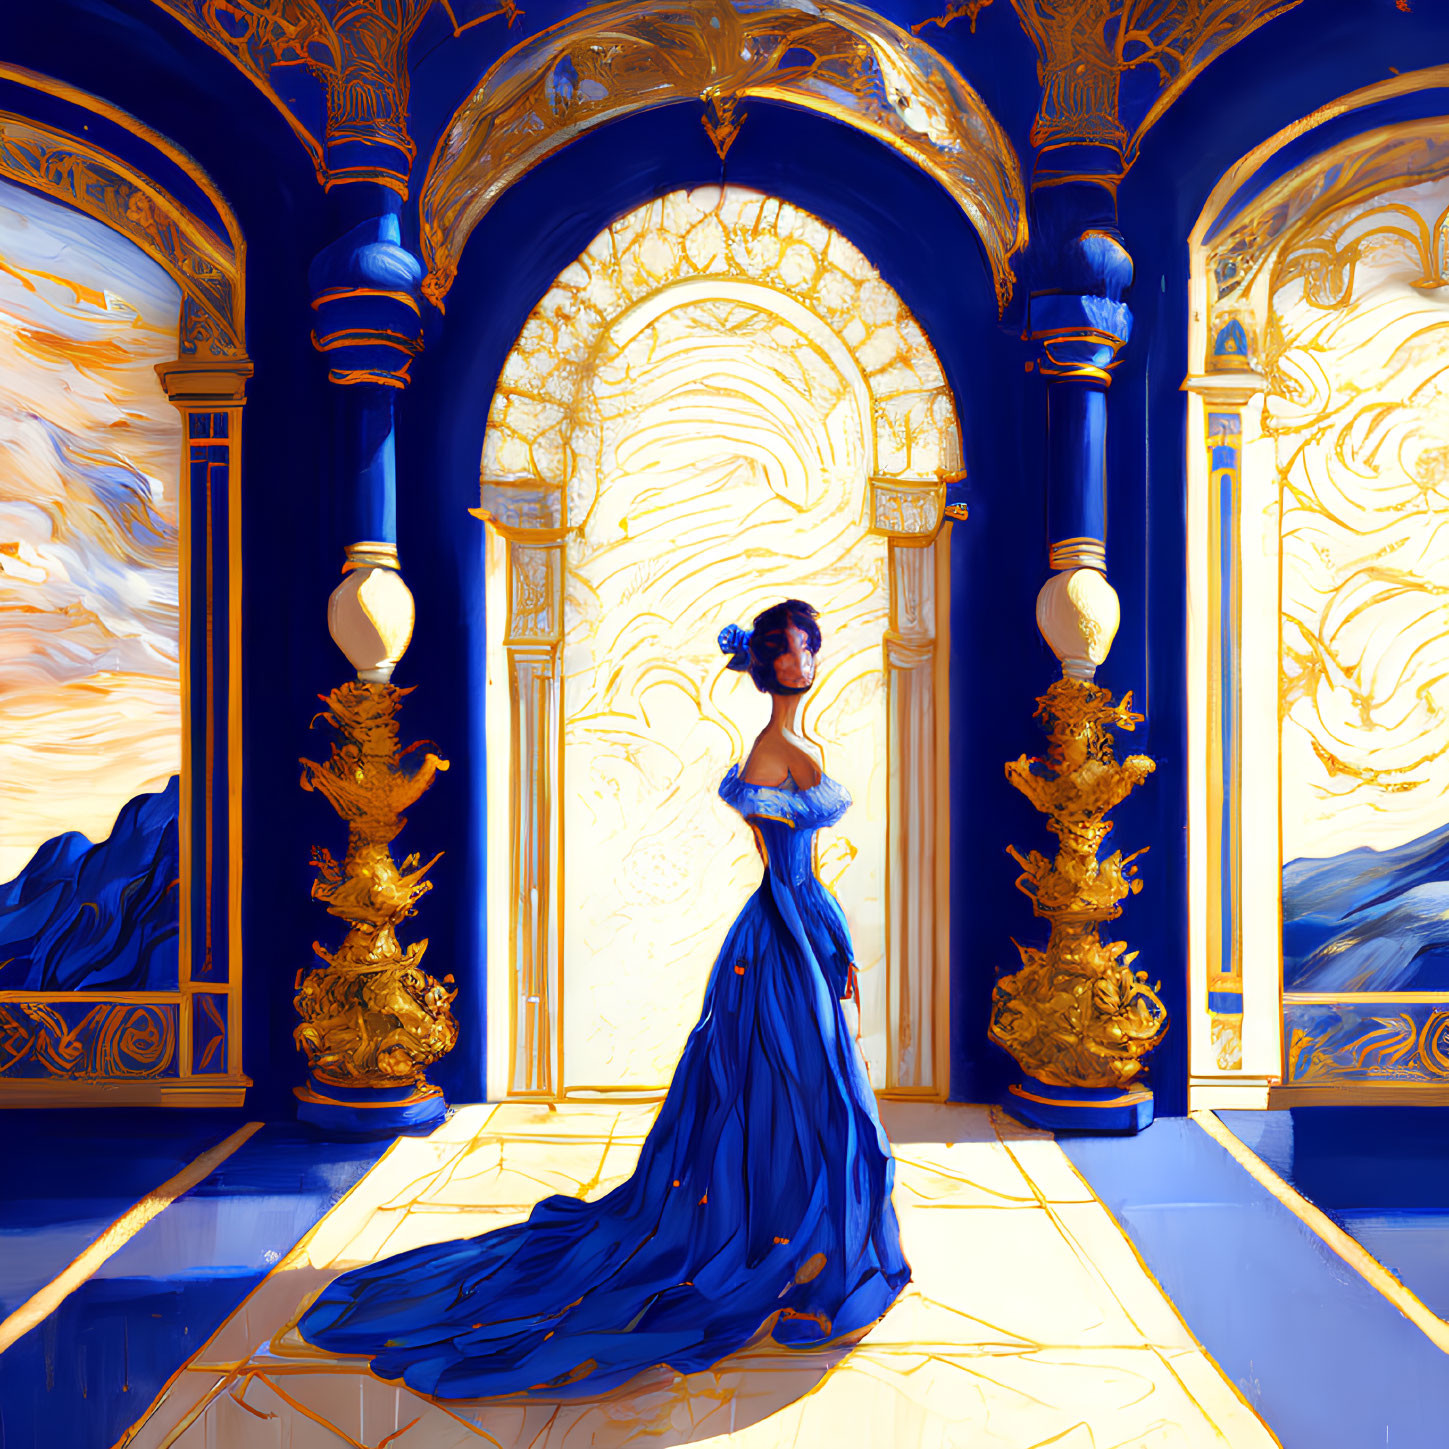 Elegant woman in blue gown in luxurious room with golden pillars